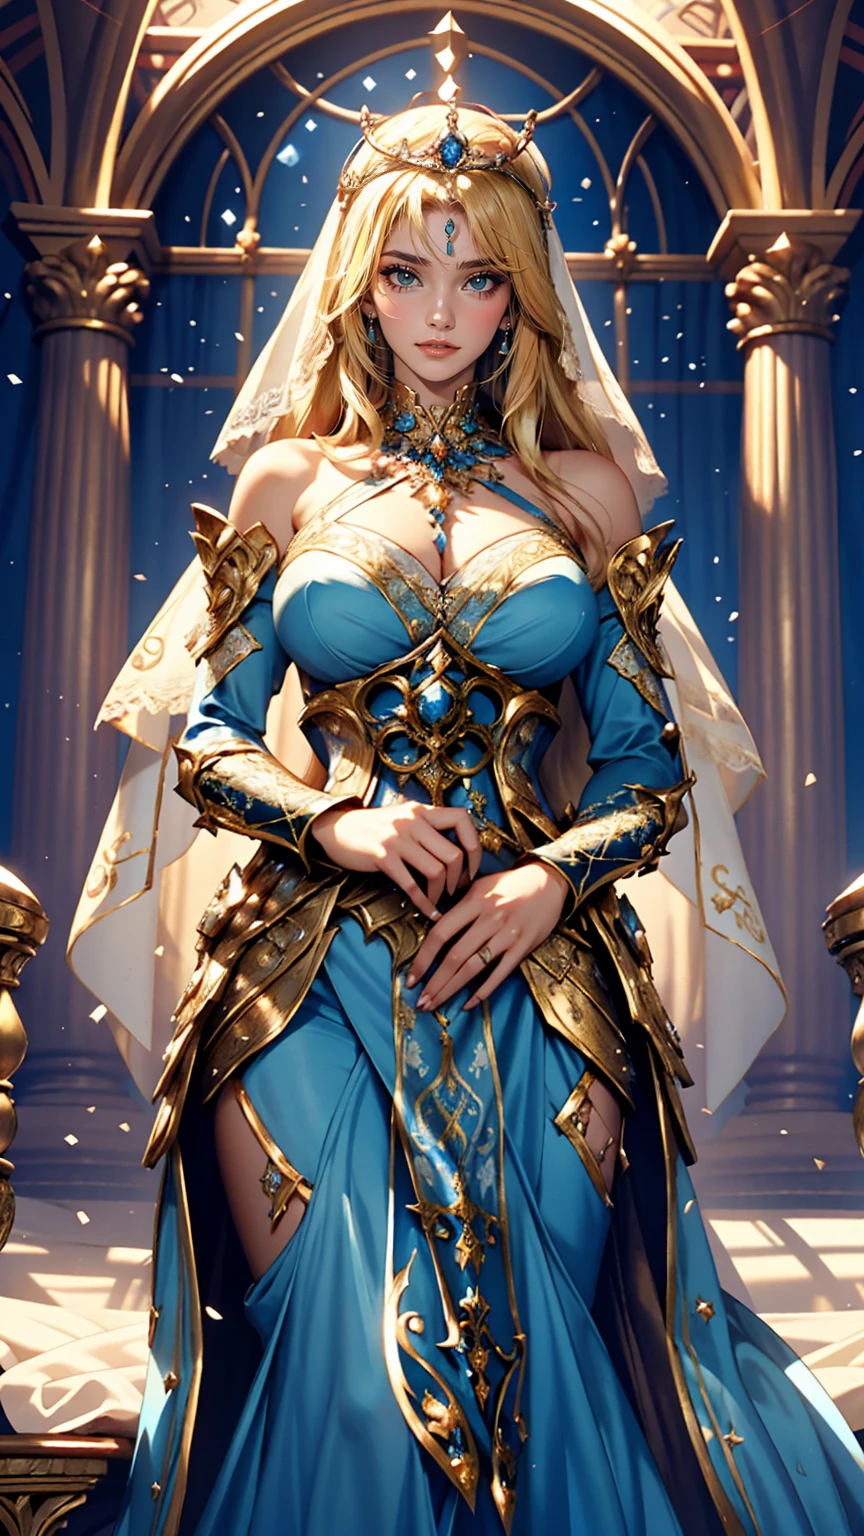 Wearing a blue dress and a veil、Blonde woman with a veil on her head, Beautiful fantasy maiden, Detailed fantasy art, Beautiful fantasy art, Blonde Princess, artgerm の artstation pixiv, Beautiful maiden, ((Beautiful Fantasy Empress)), 2. 5d cgi anime fantasy artwork, Fantasy art style, Detailed digital anime art, Fantasy style art